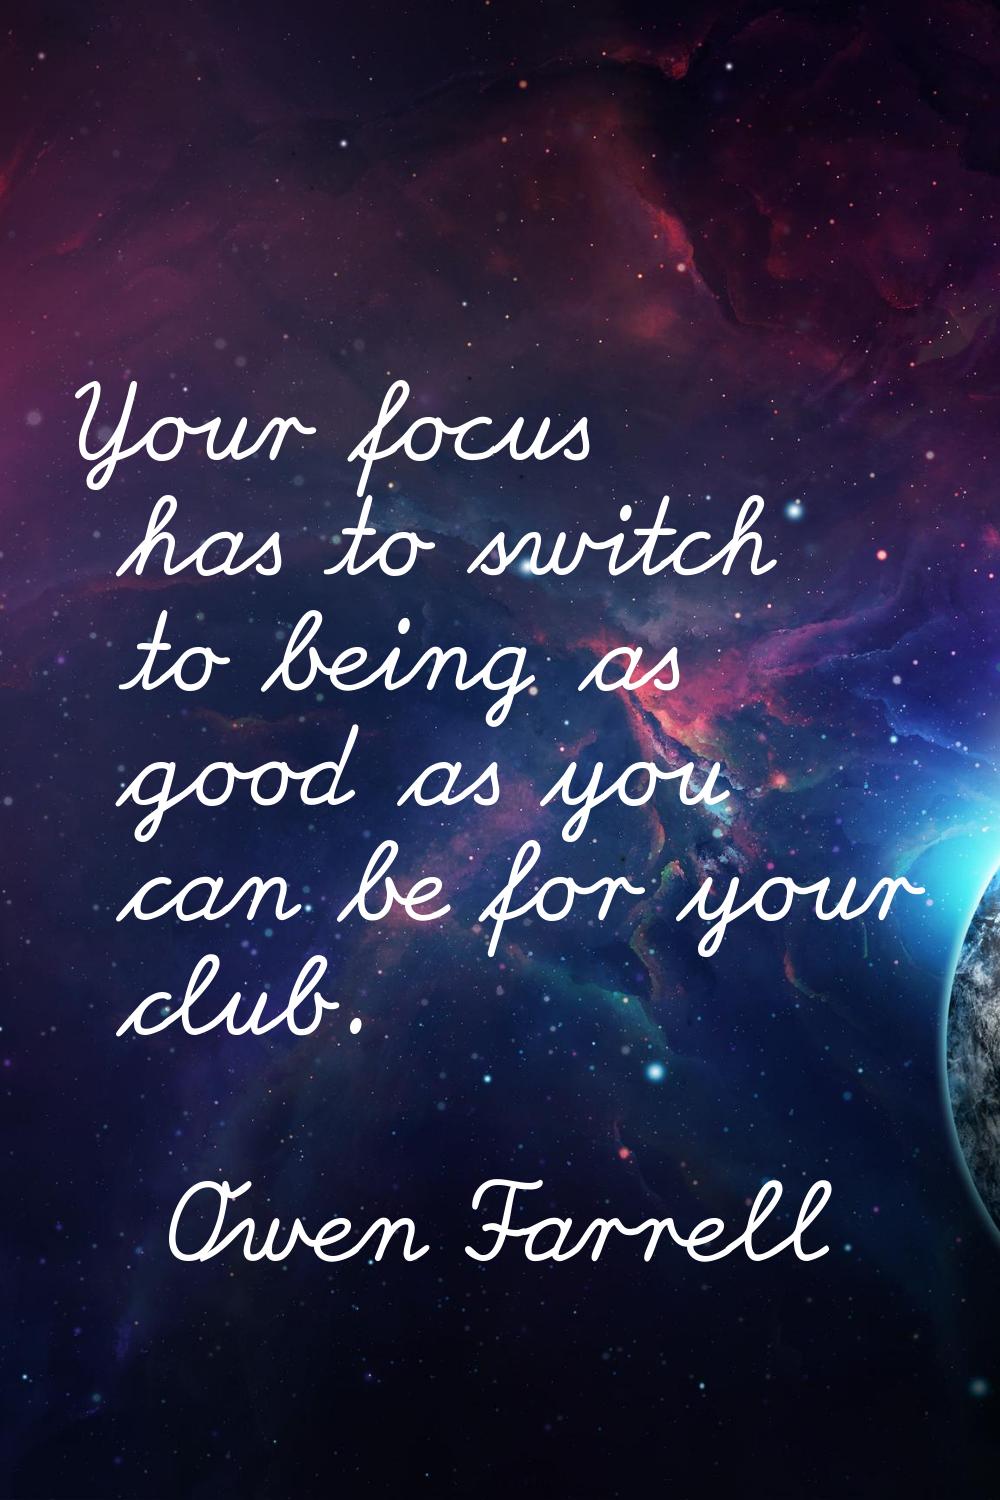 Your focus has to switch to being as good as you can be for your club.